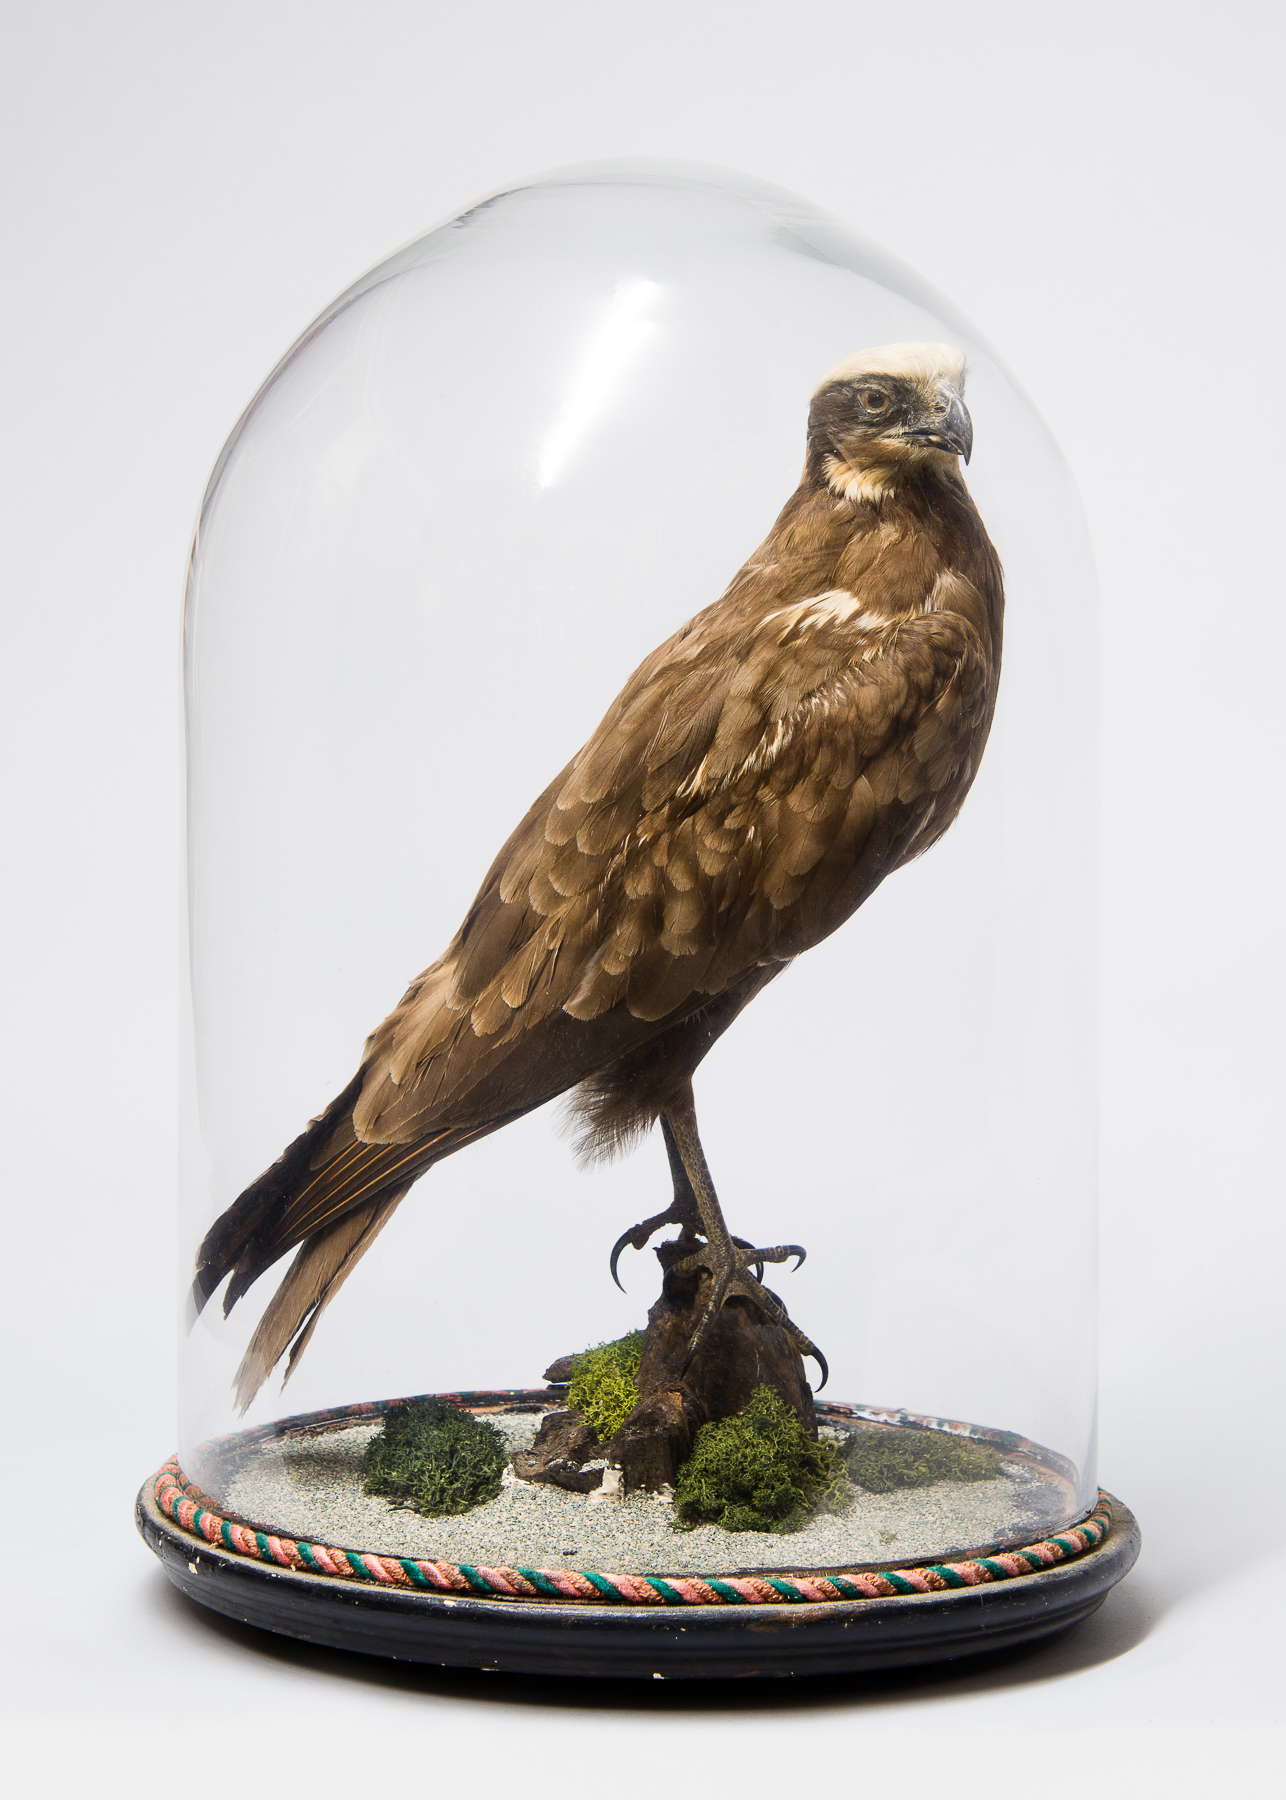 A LATE 19TH CENTURY TAXIDERMY MARSH HARRIER UNDER GLASS DOME Re-cased with modern groundwork. (h